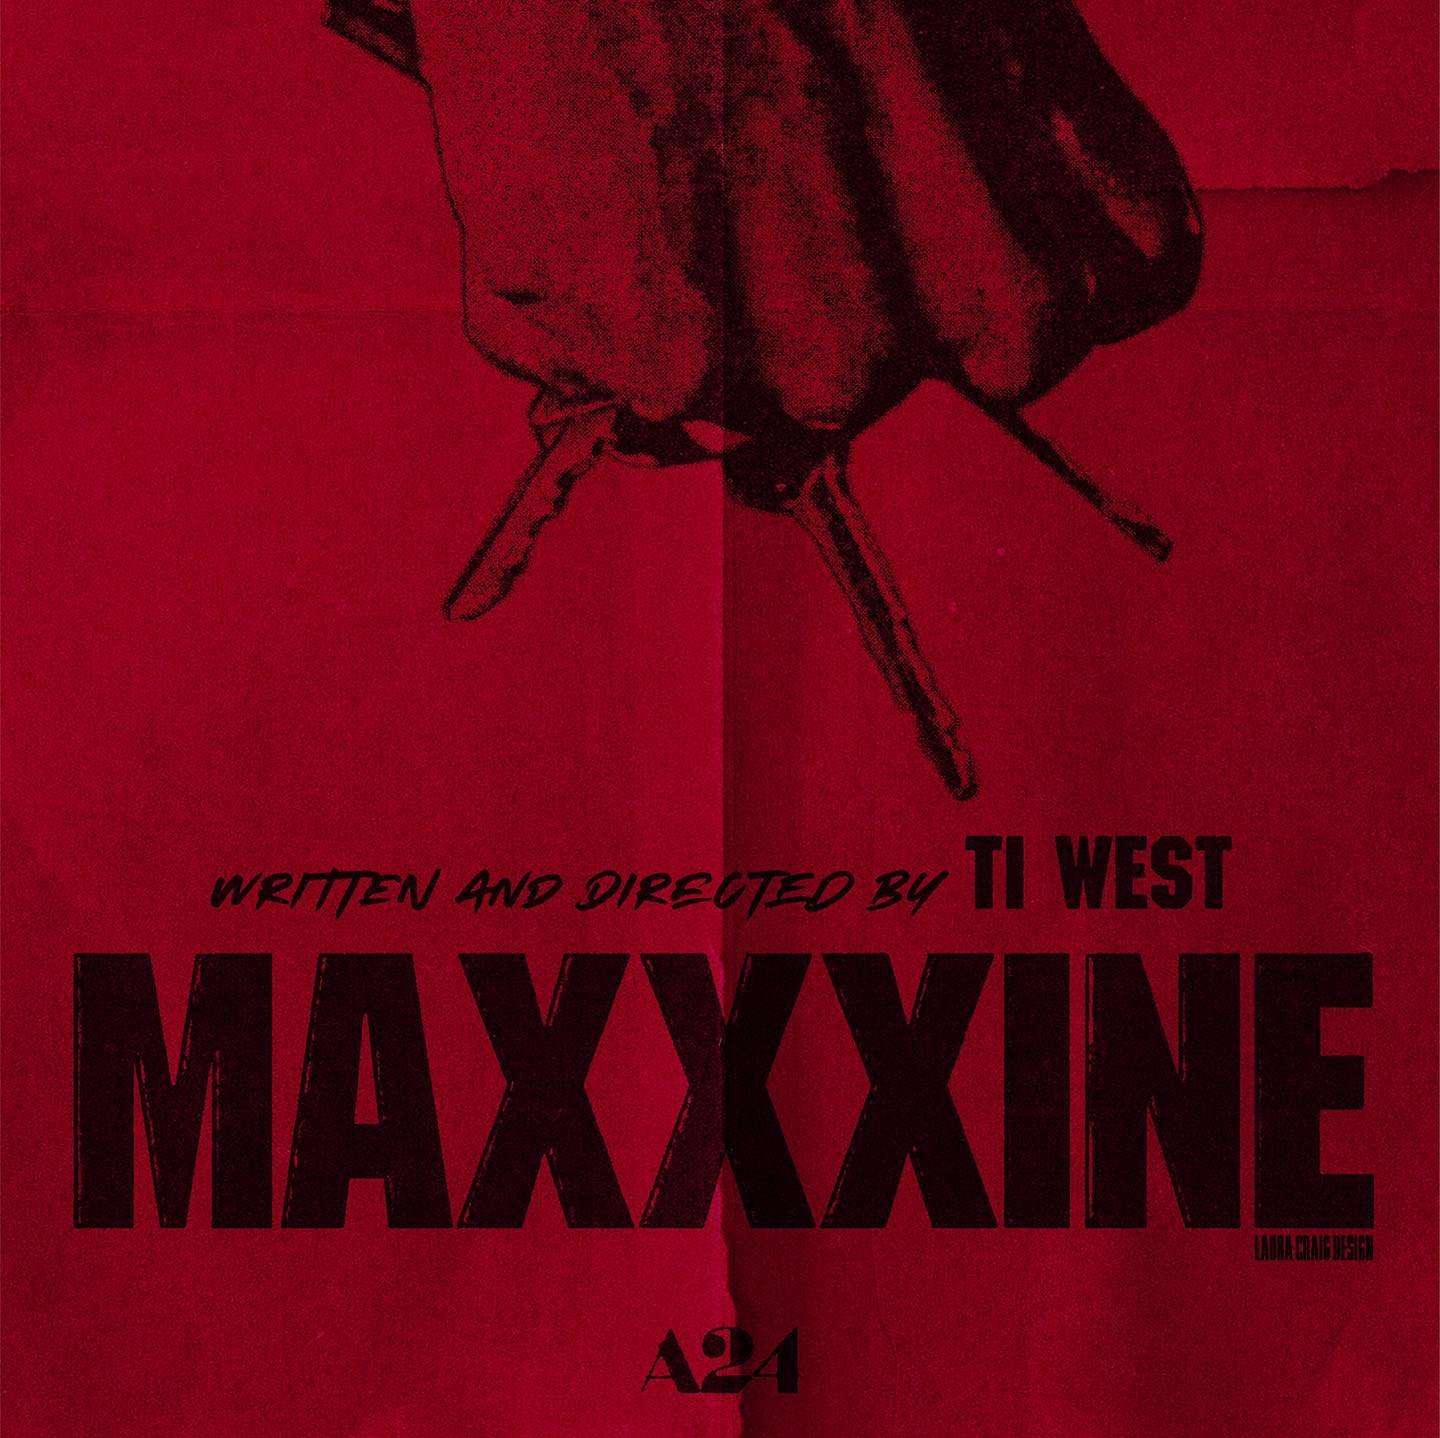 I, I live among the creatures of the night.

Potential to be the greatest horror trilogy? 

#maXXXine #TiWest #a24 #horror #movieposter #posterdesign #horrorart #design #fanart